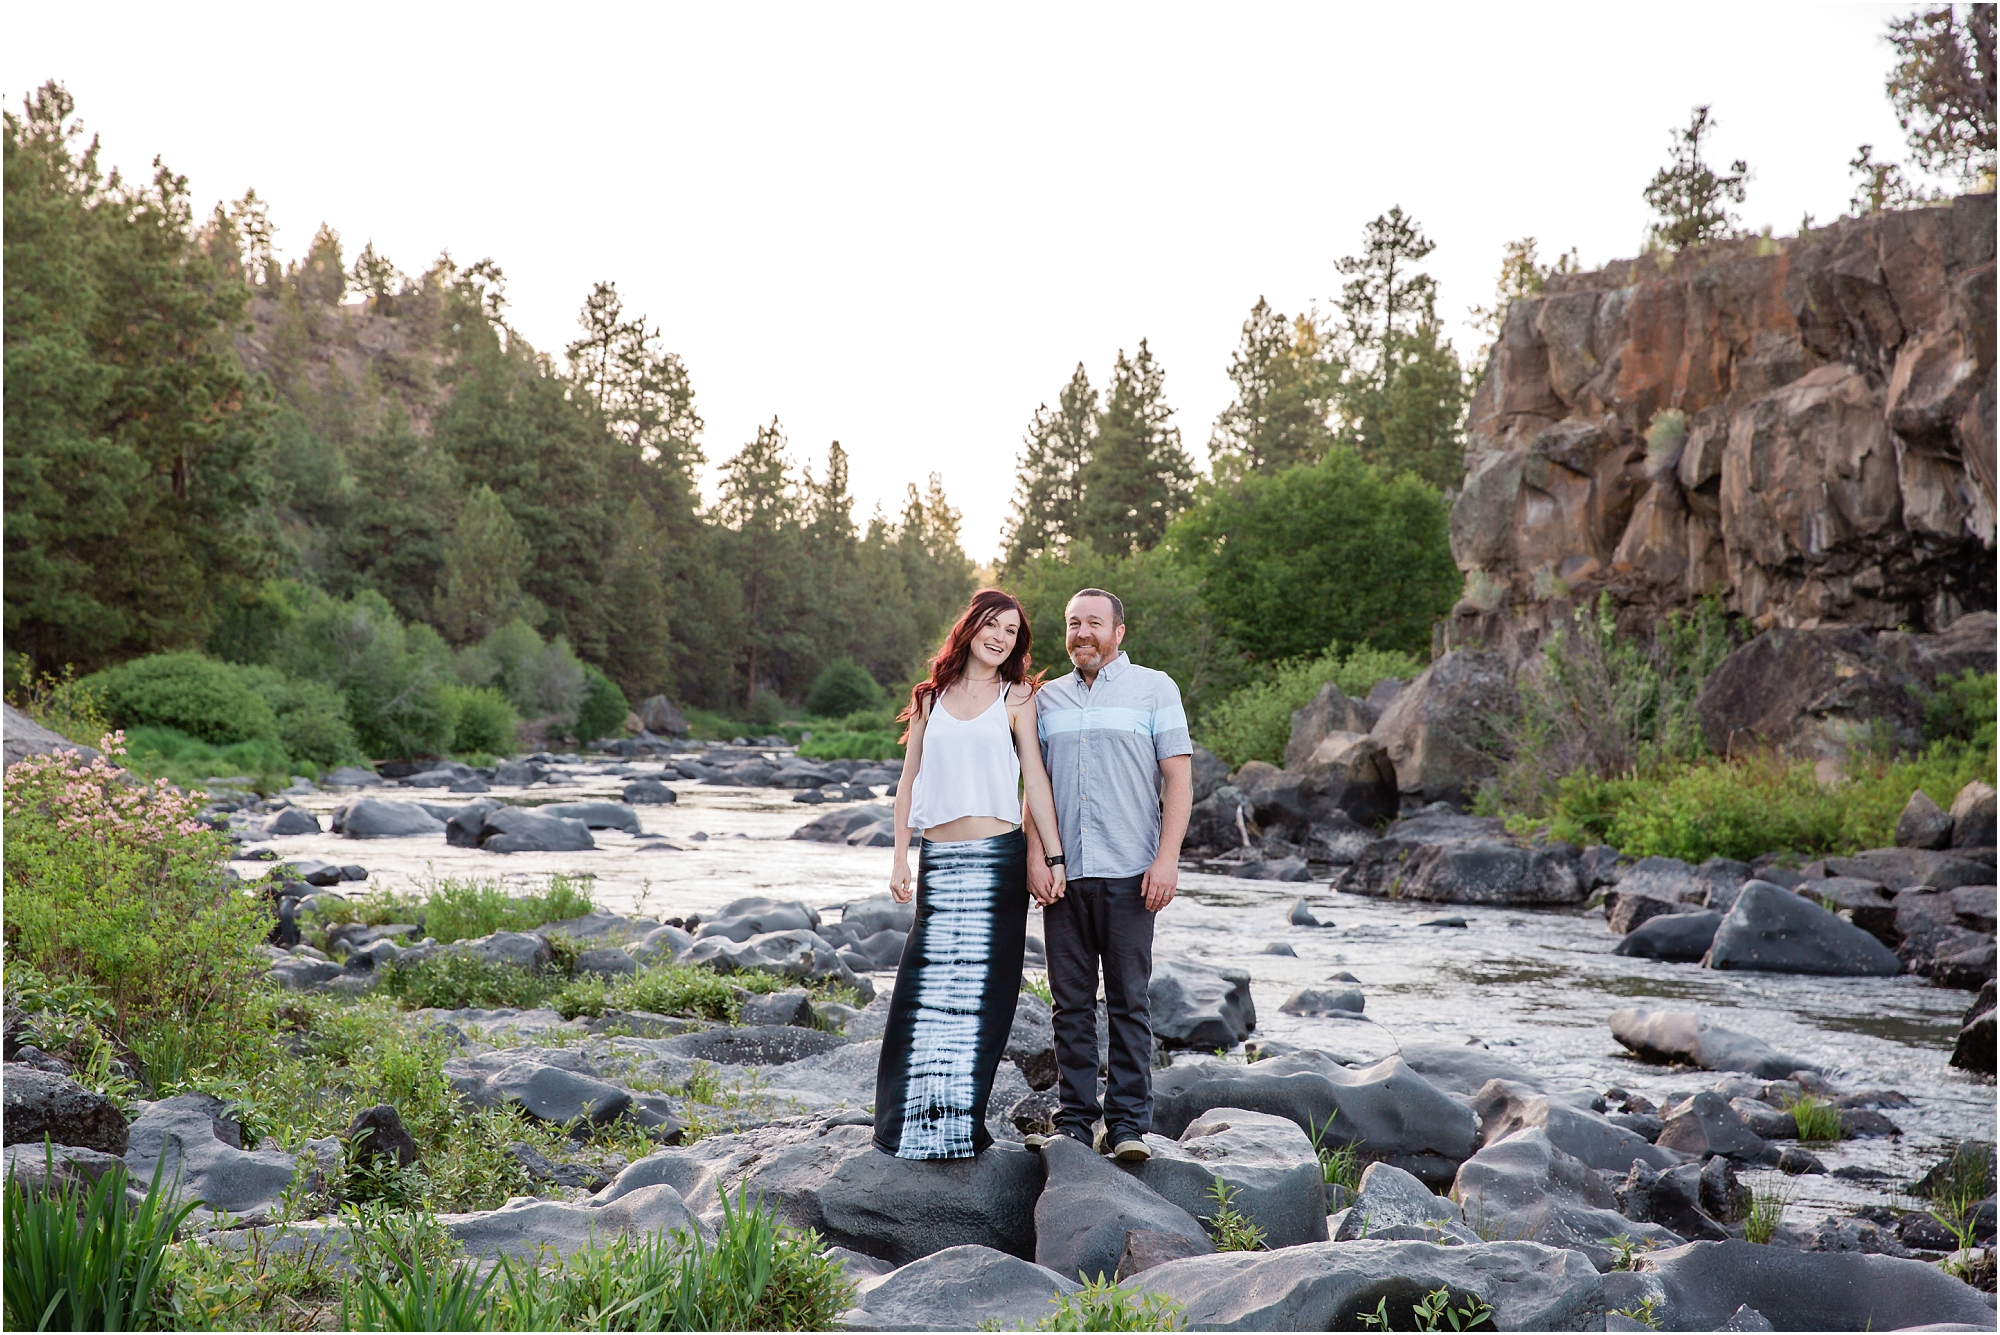 A gorgeous Bend engagement session along the Deschutes River at Sawyer Park in Bend, OR. | Erica Swantek Photography